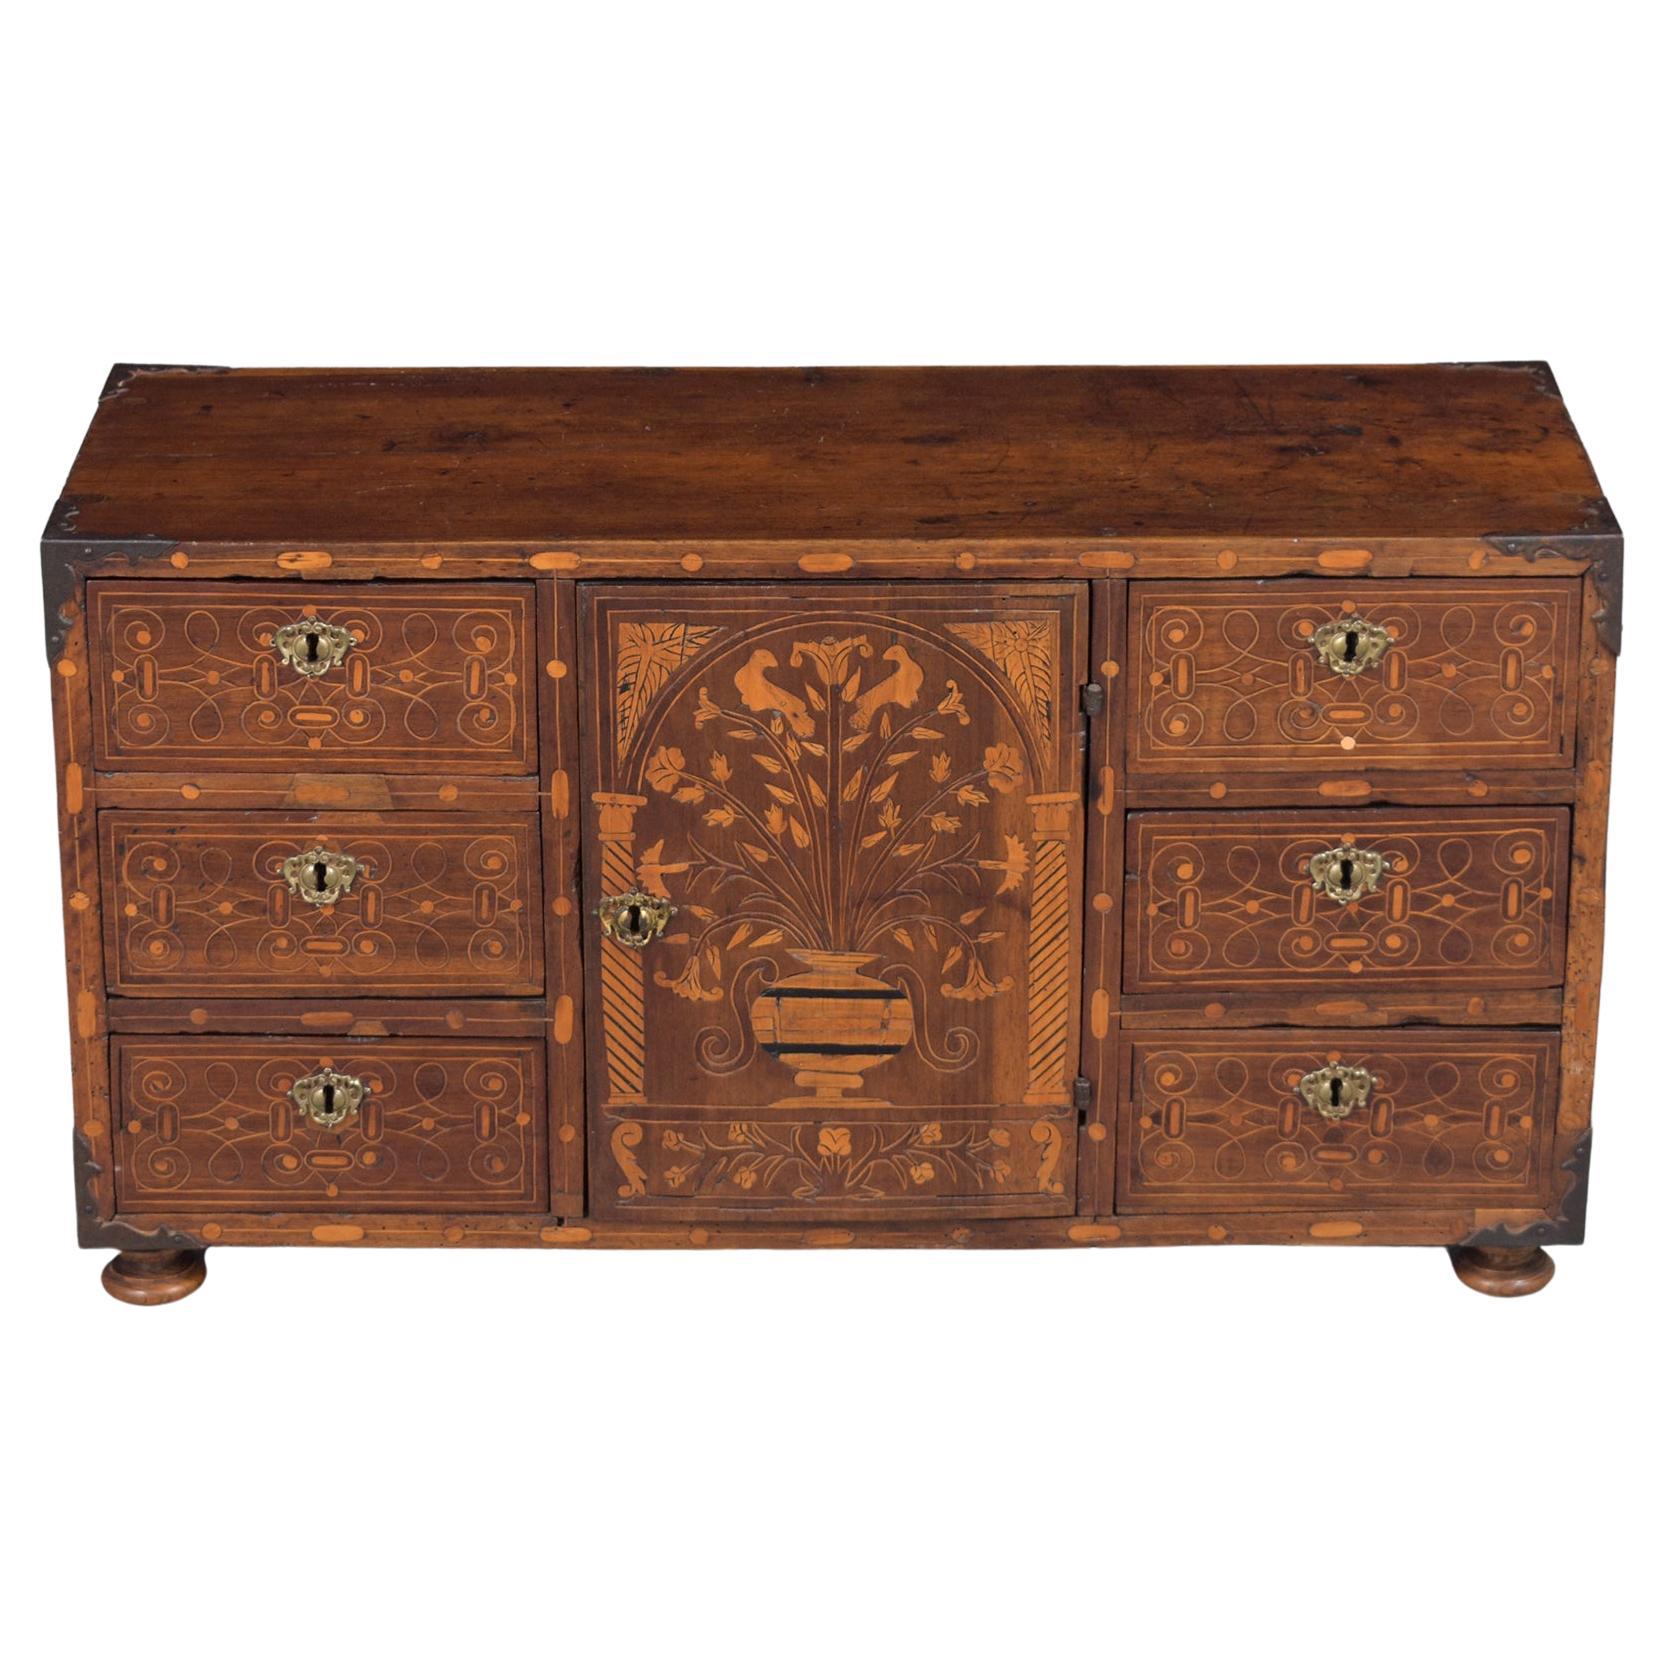 Restored 18th-Century Spanish Bargueño Cabinet with Intricate Marquetry